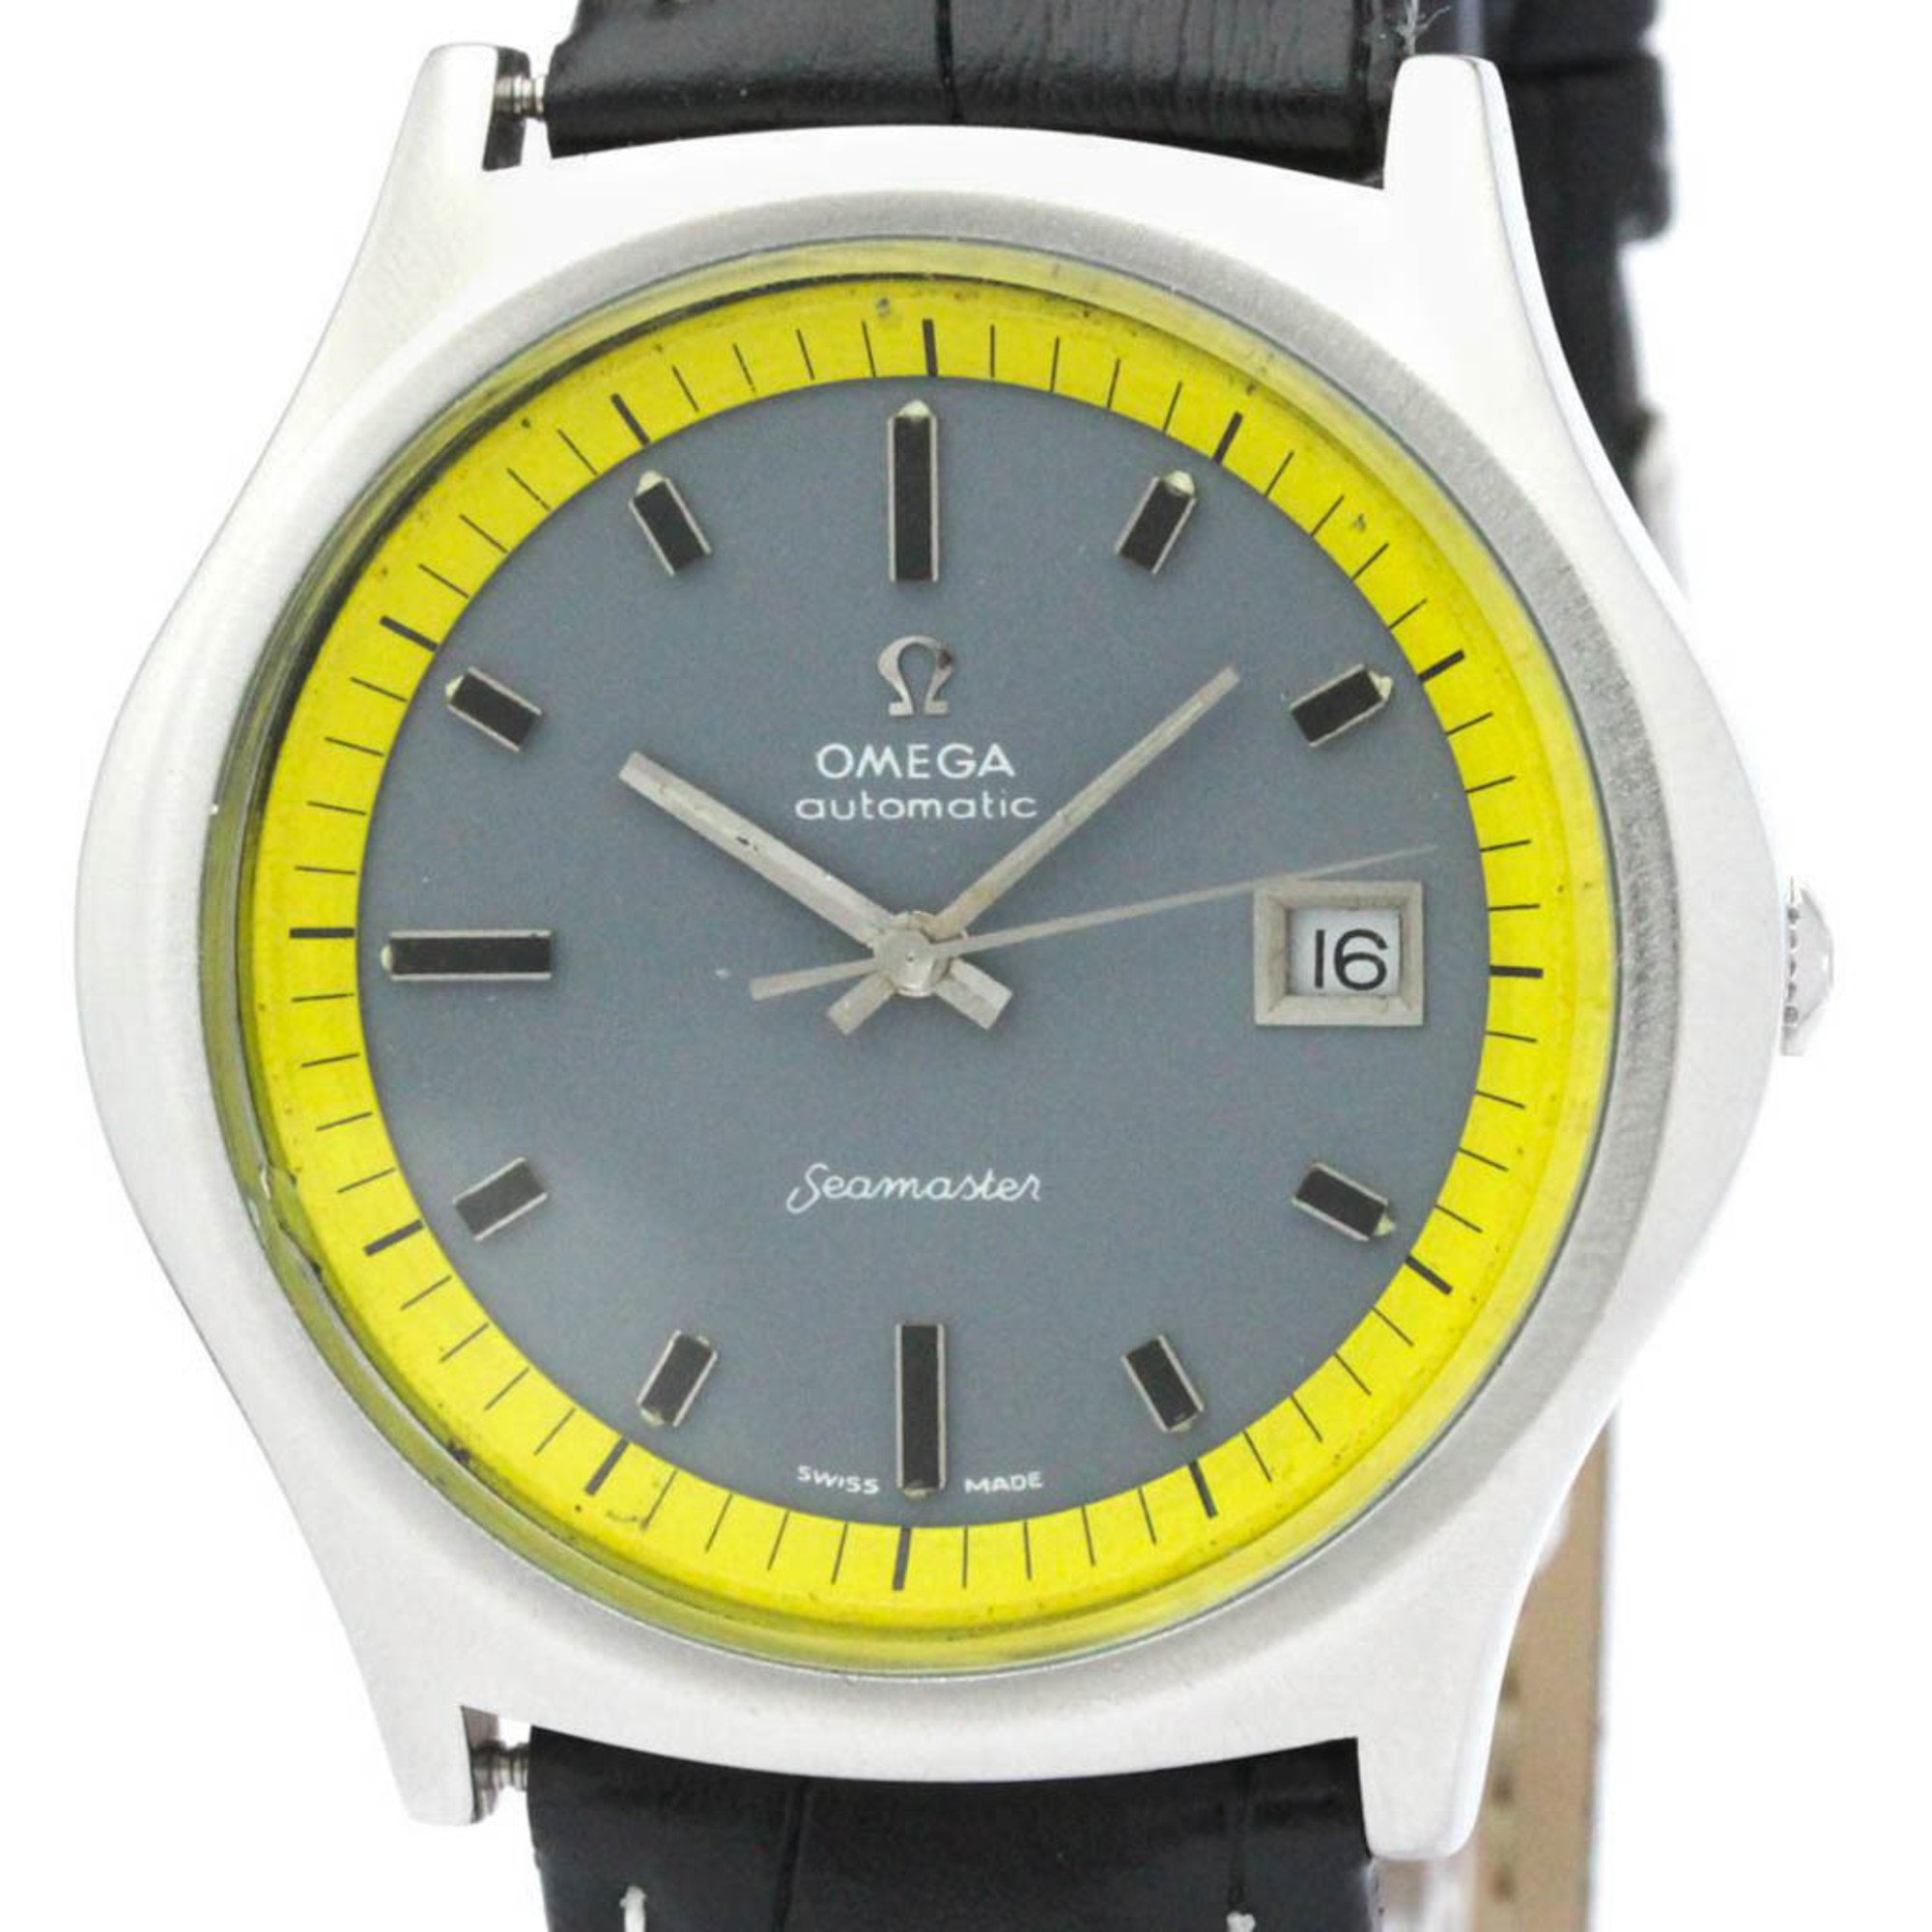 Vintage OMEGA Seamaster Big Yellow Steel Automatic Mens Watch 166.092 BF554606